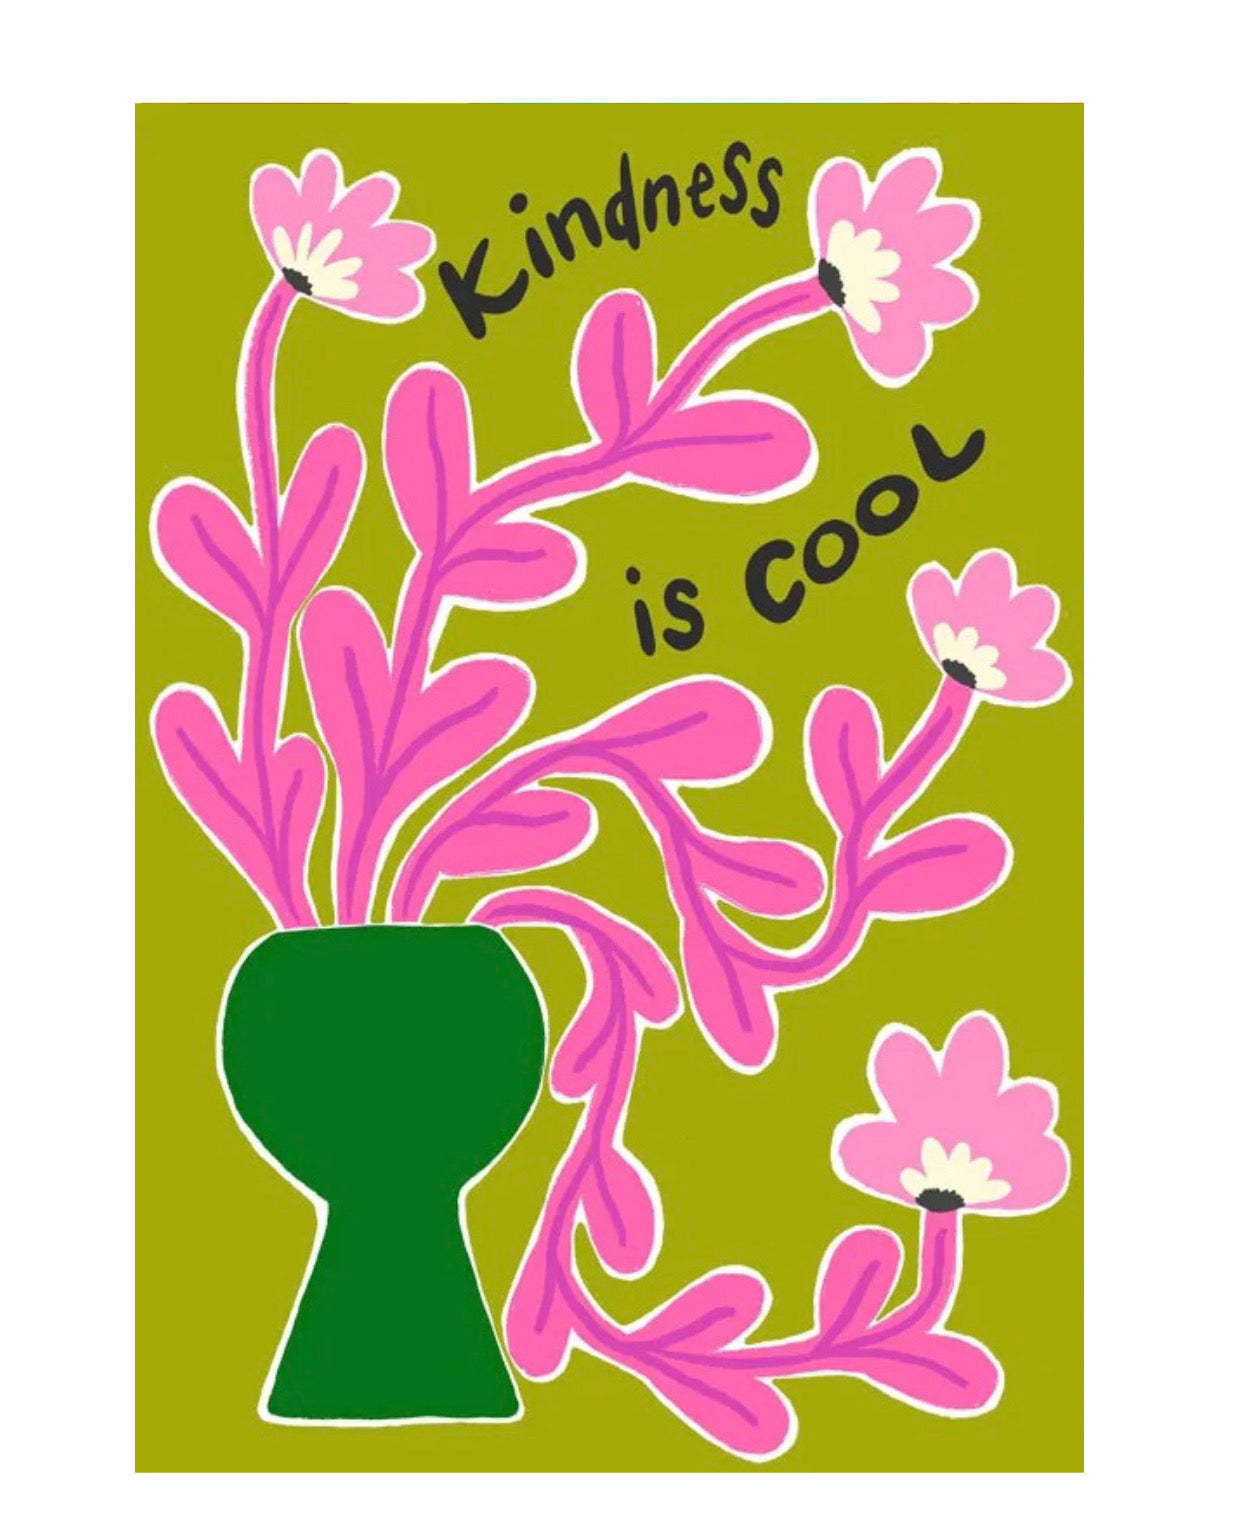 "kindness is cool" poster